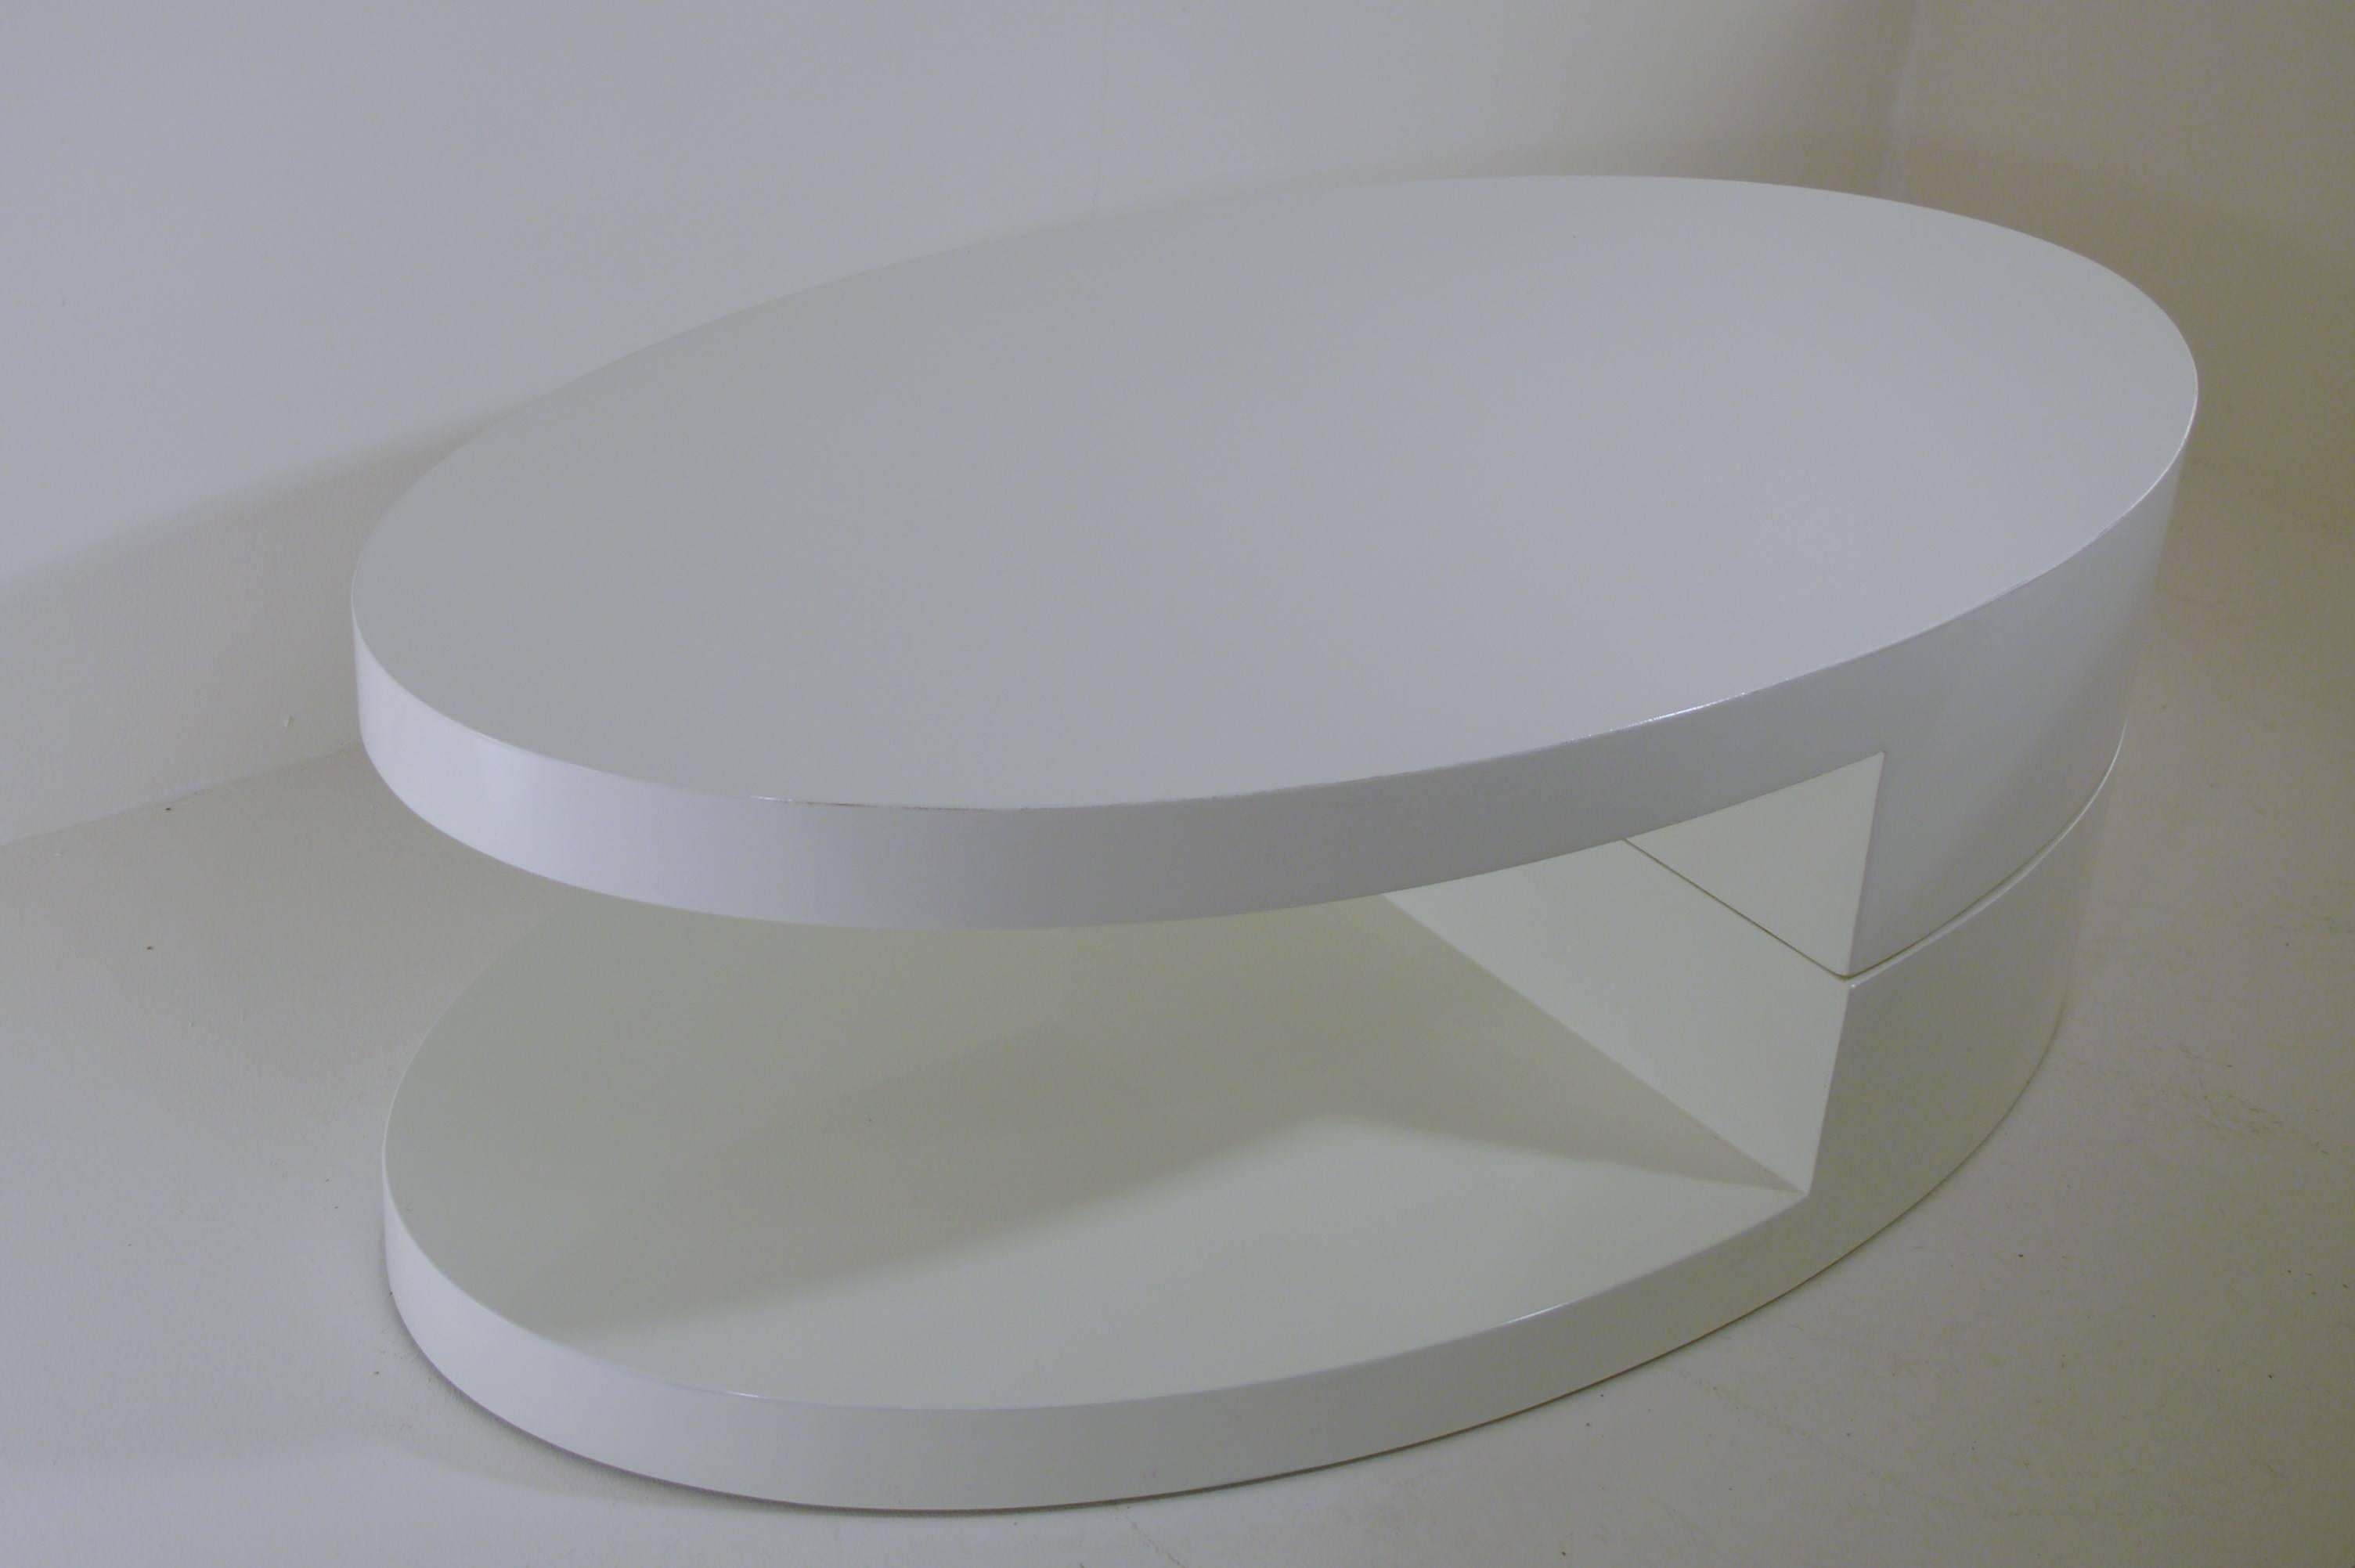 Amazing rotating coffee table lacquered in white, inspired by Joe Columbo